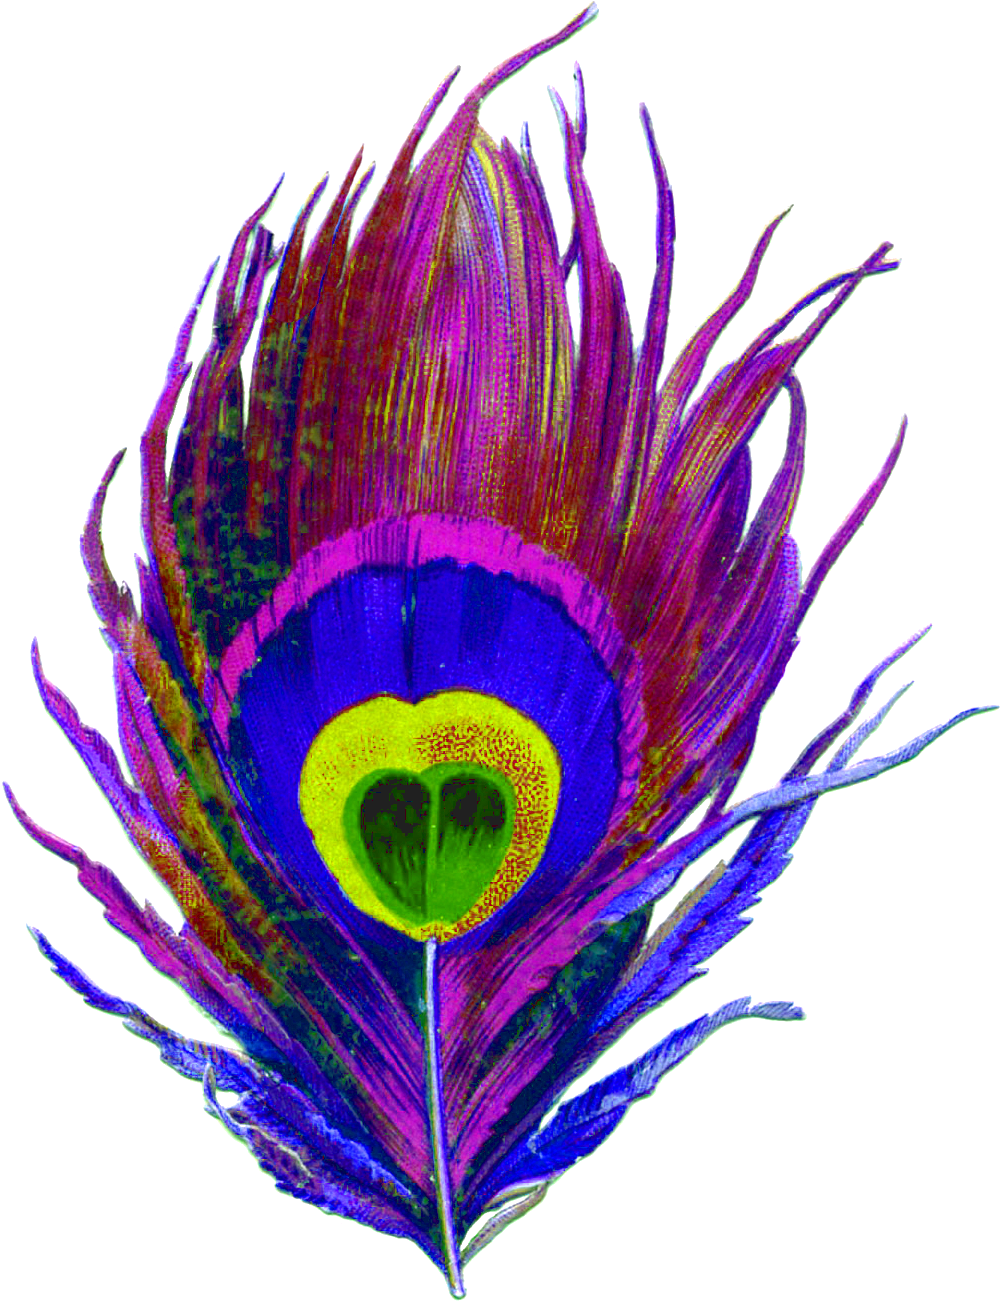 Purple, Peacock, Bird, Feather, Colorful, Eye, Designs - Peacock Feathers Png Transparent (1084x1350)